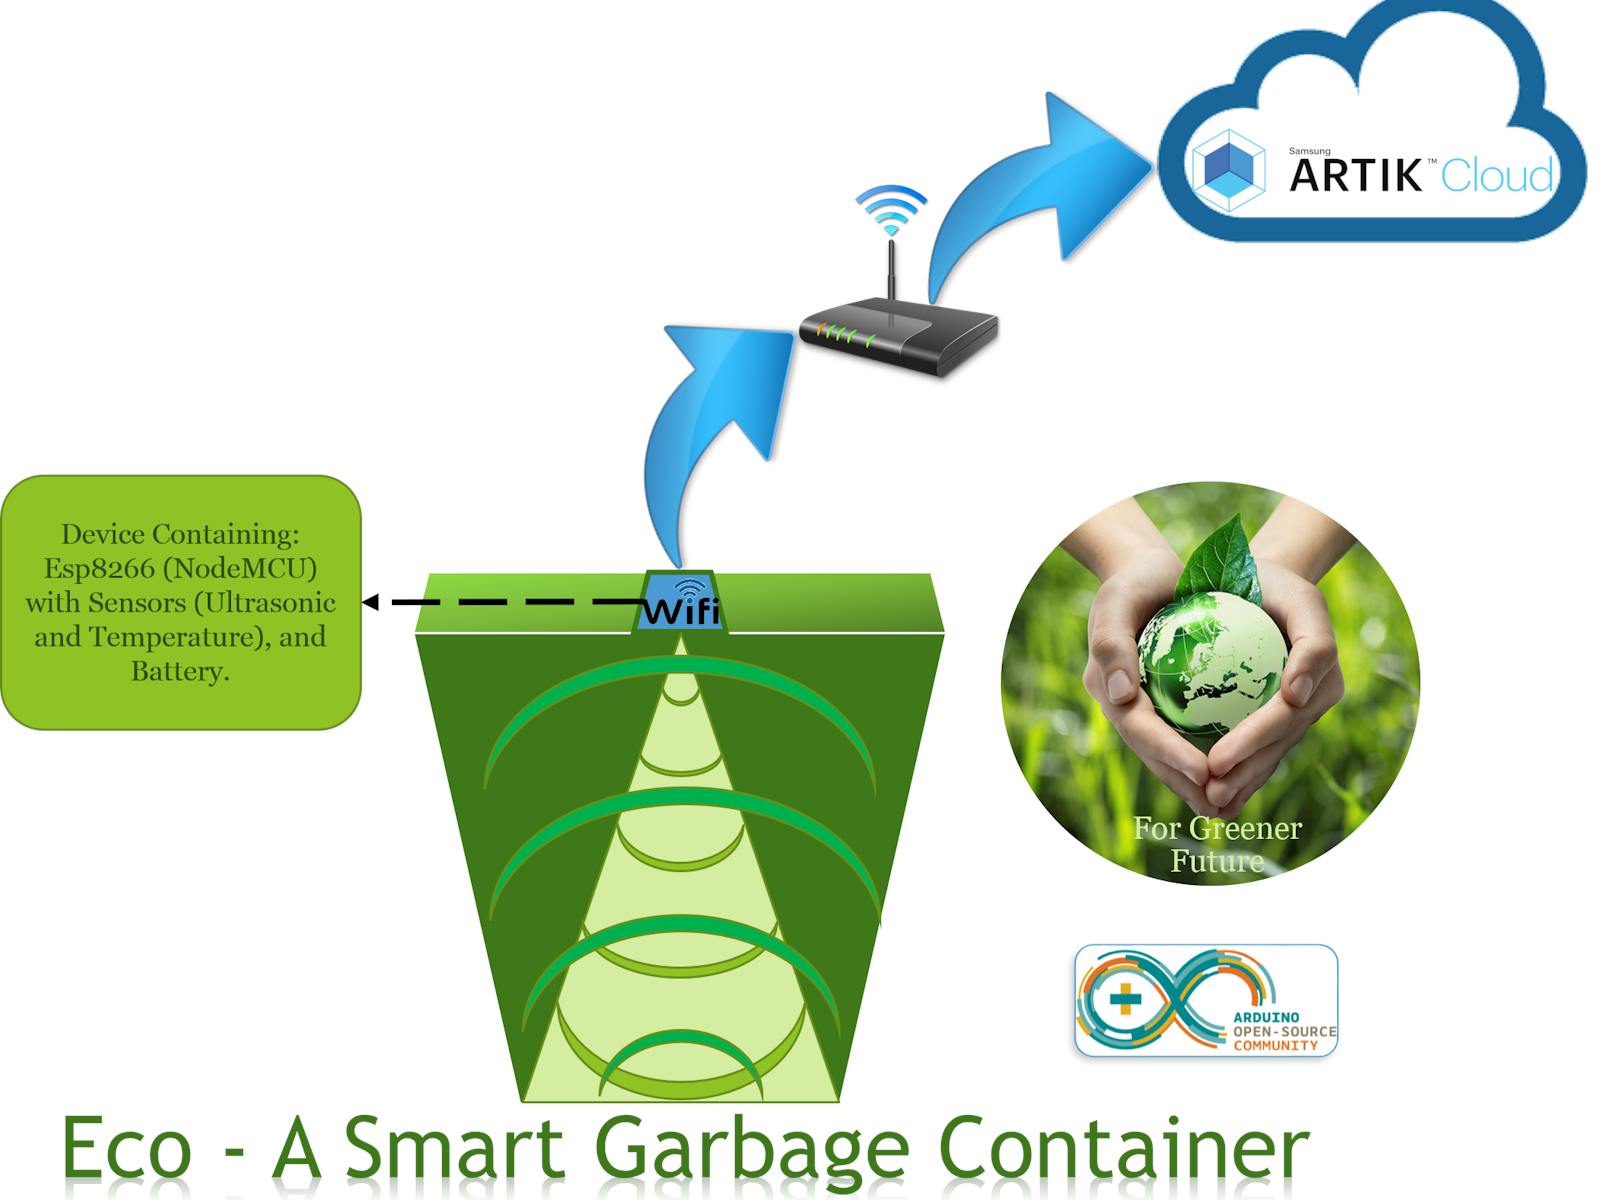 IoT Cloud based Smart Bin for Connected Smart Cities - A Product